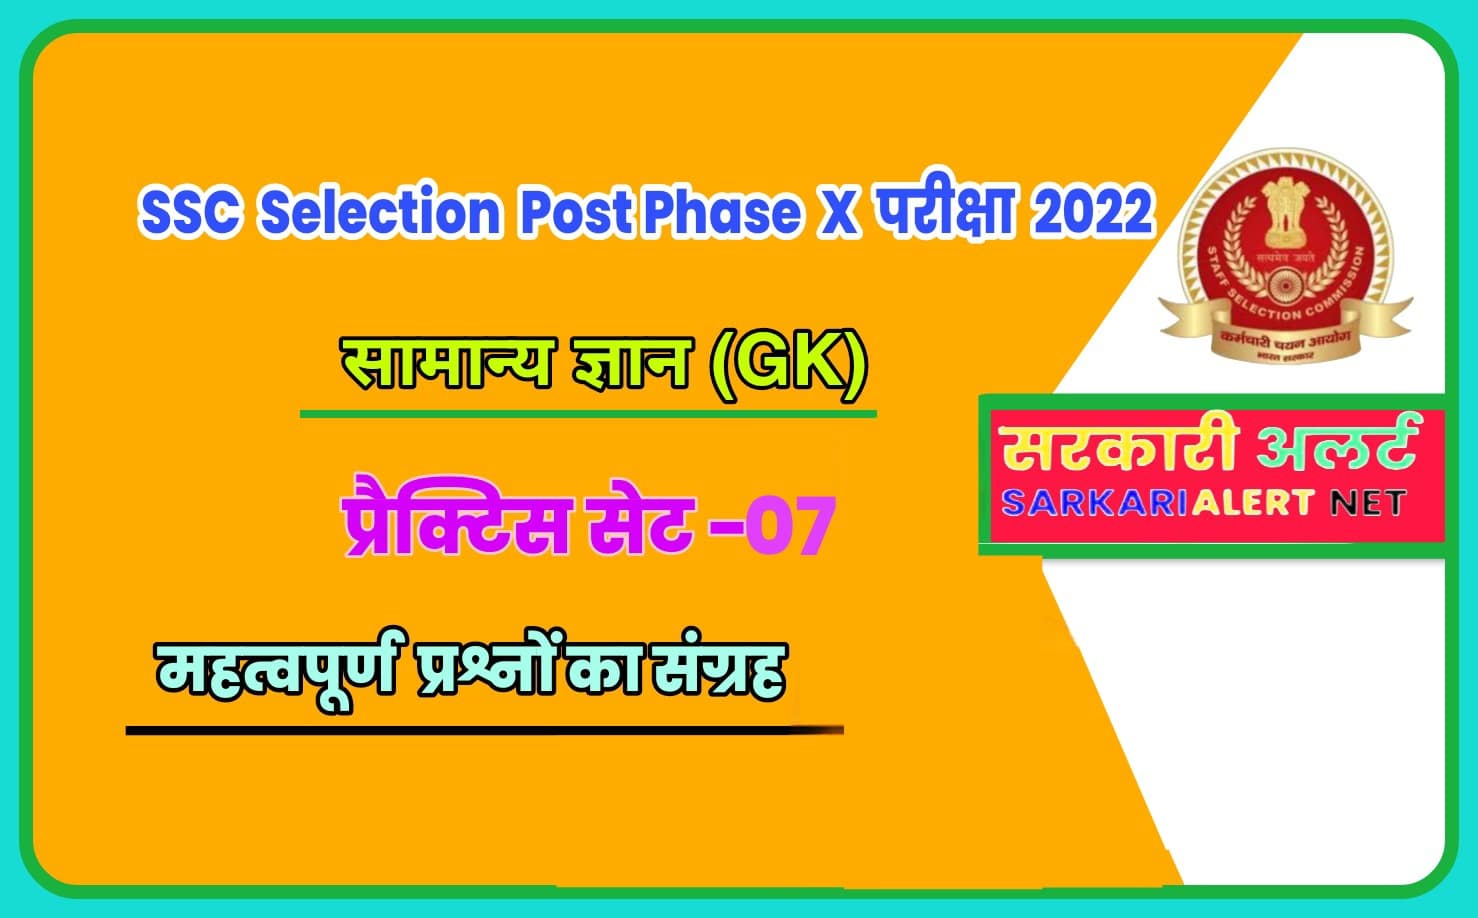 SSC Selection Post Phase X General knowledge Practice Set 07